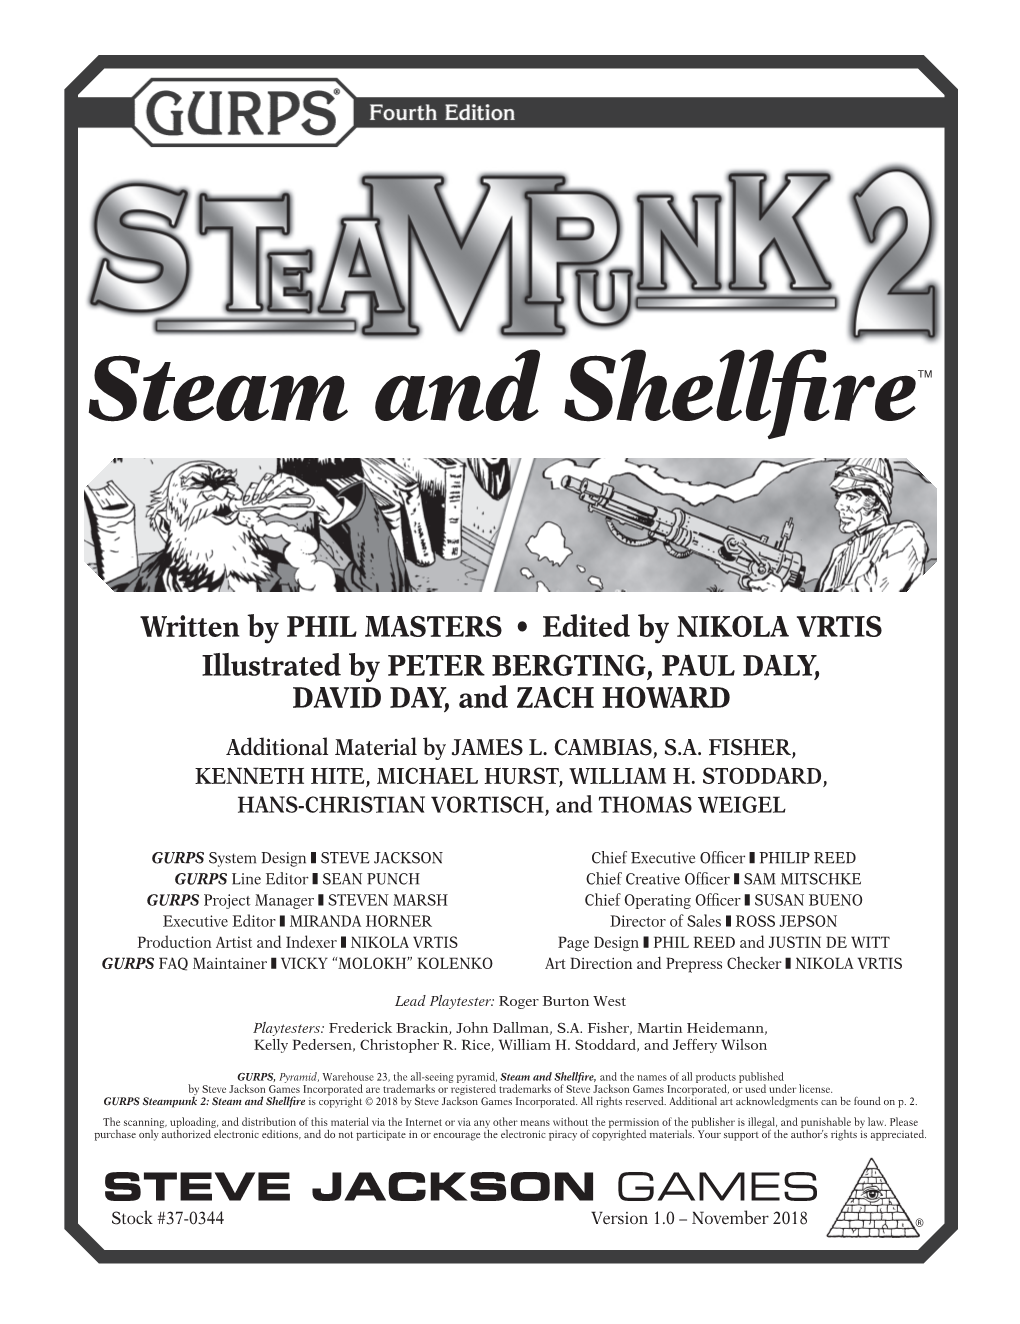 GURPS Steampunk 2: Steam and Shellﬁre Is Copyright © 2018 by Steve Jackson Games Incorporated